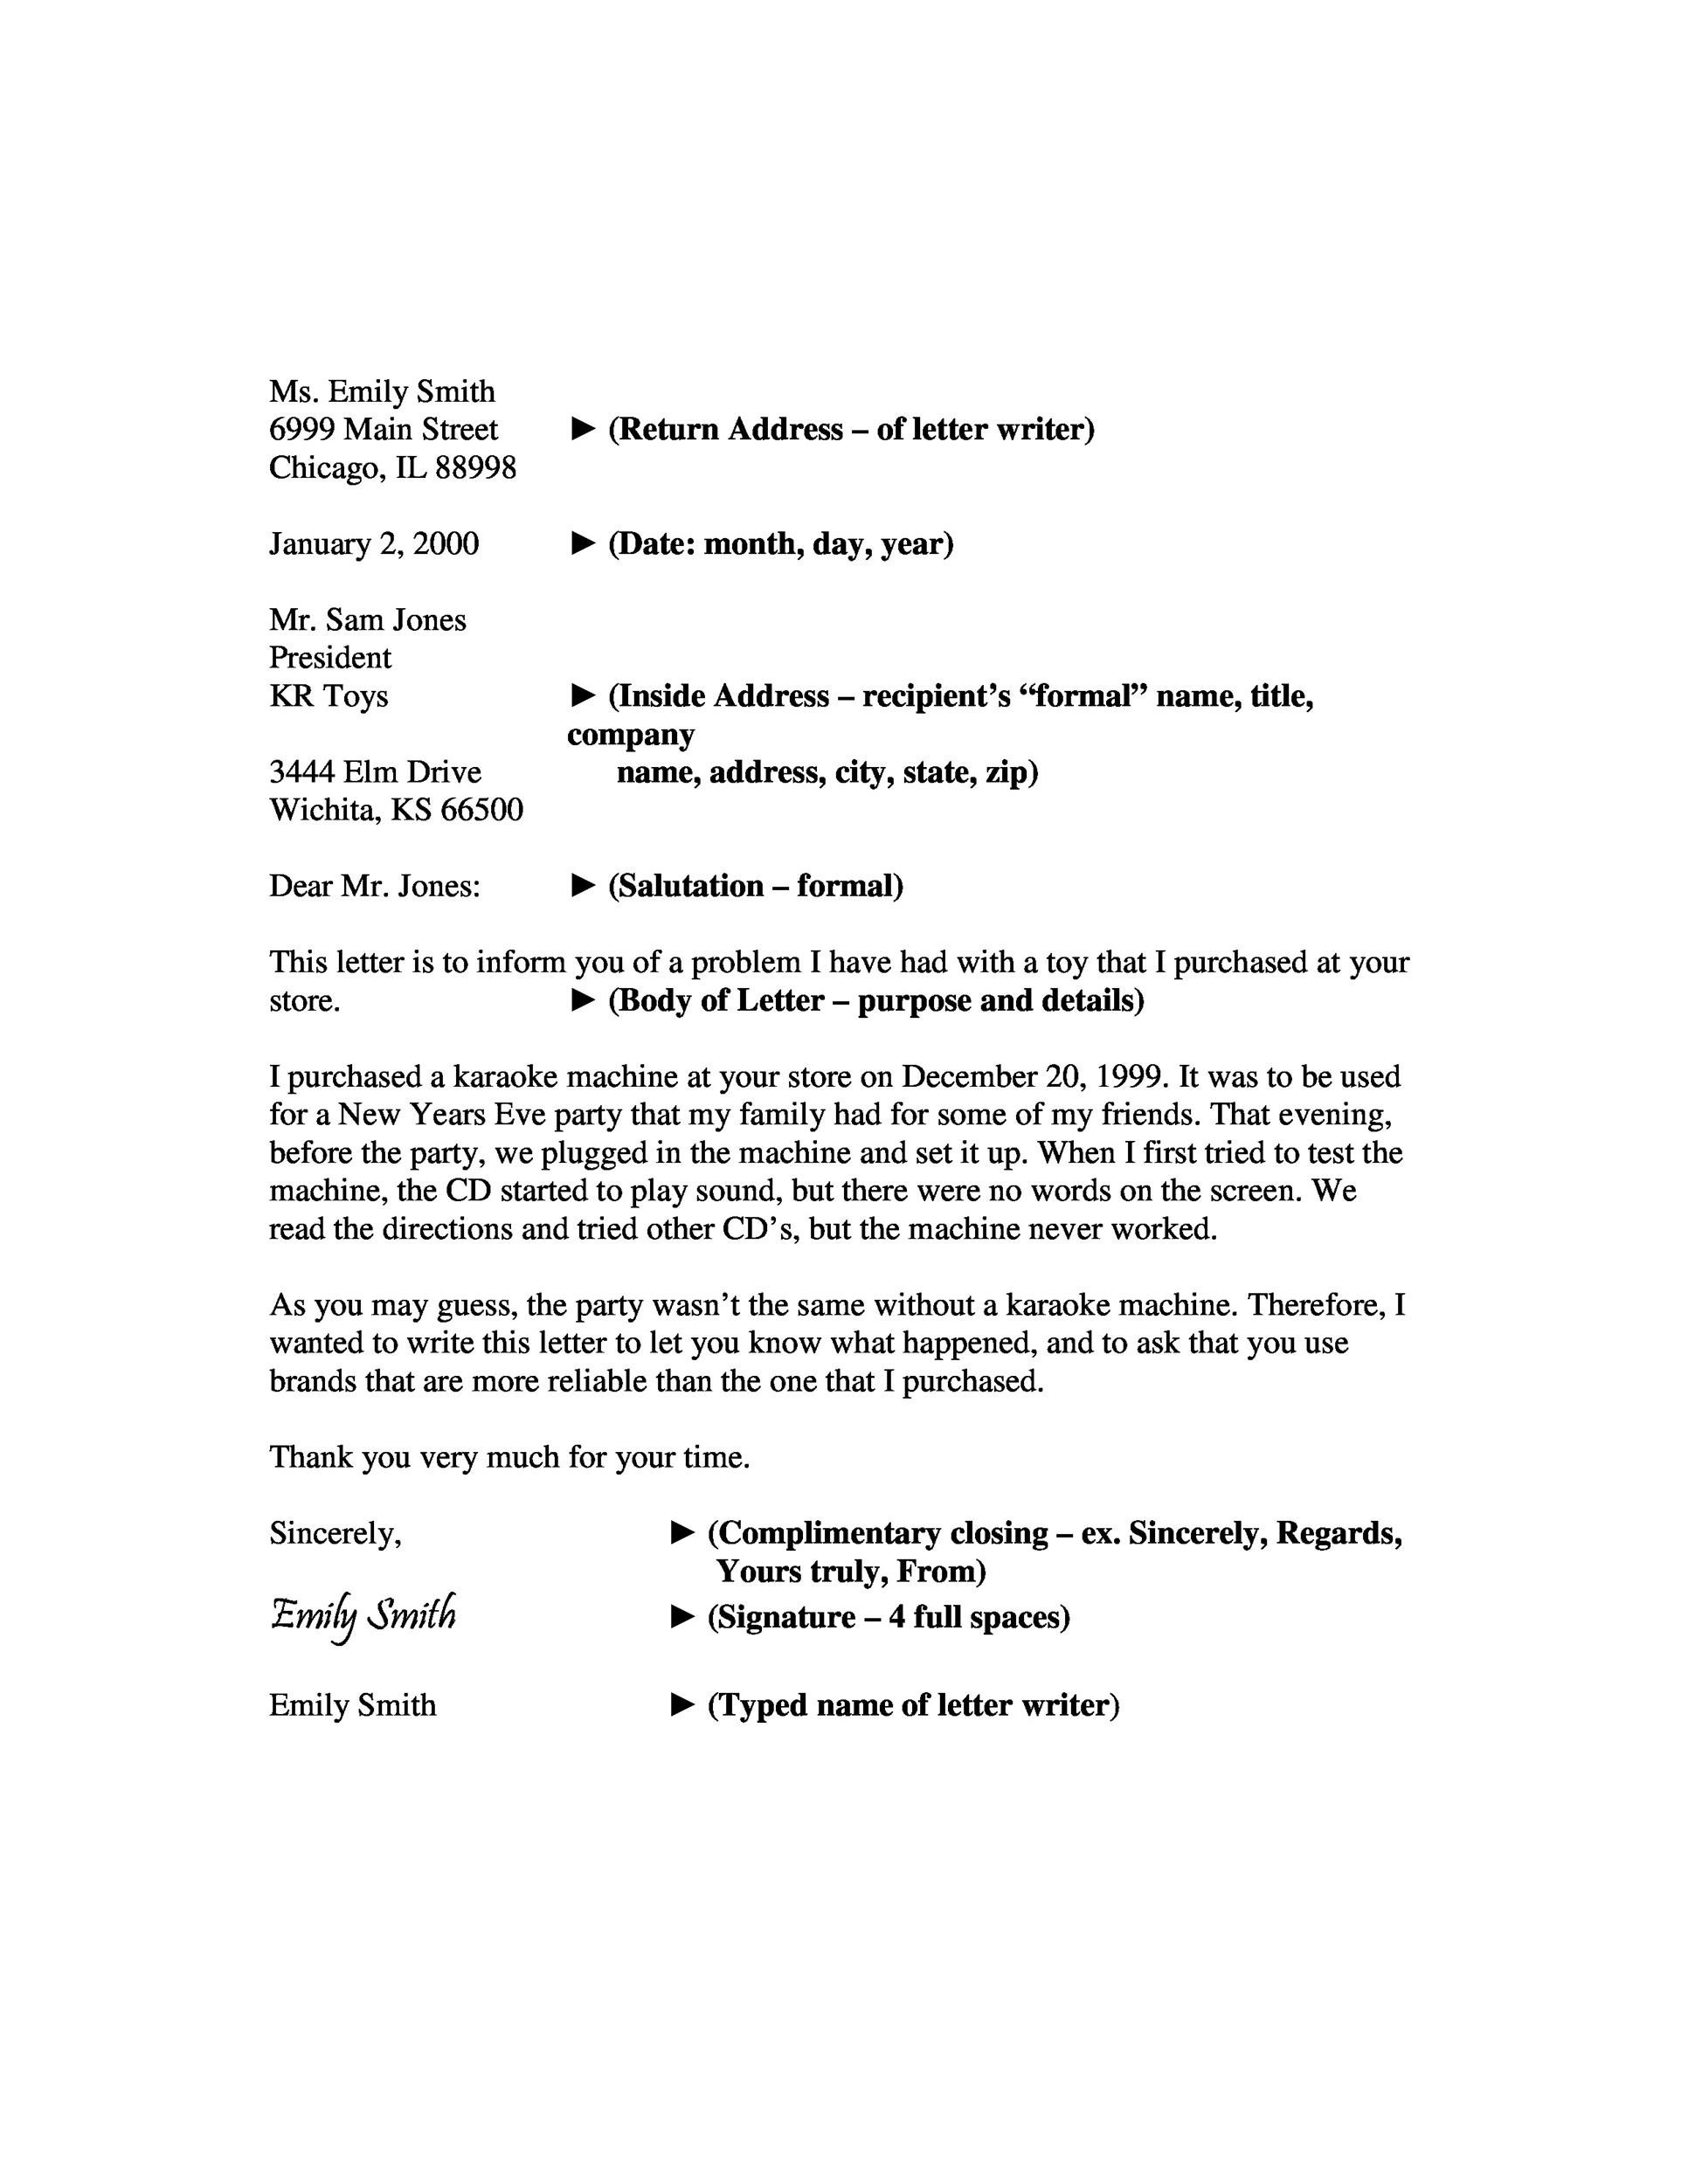 Professional Business Letter Examples from templatelab.com